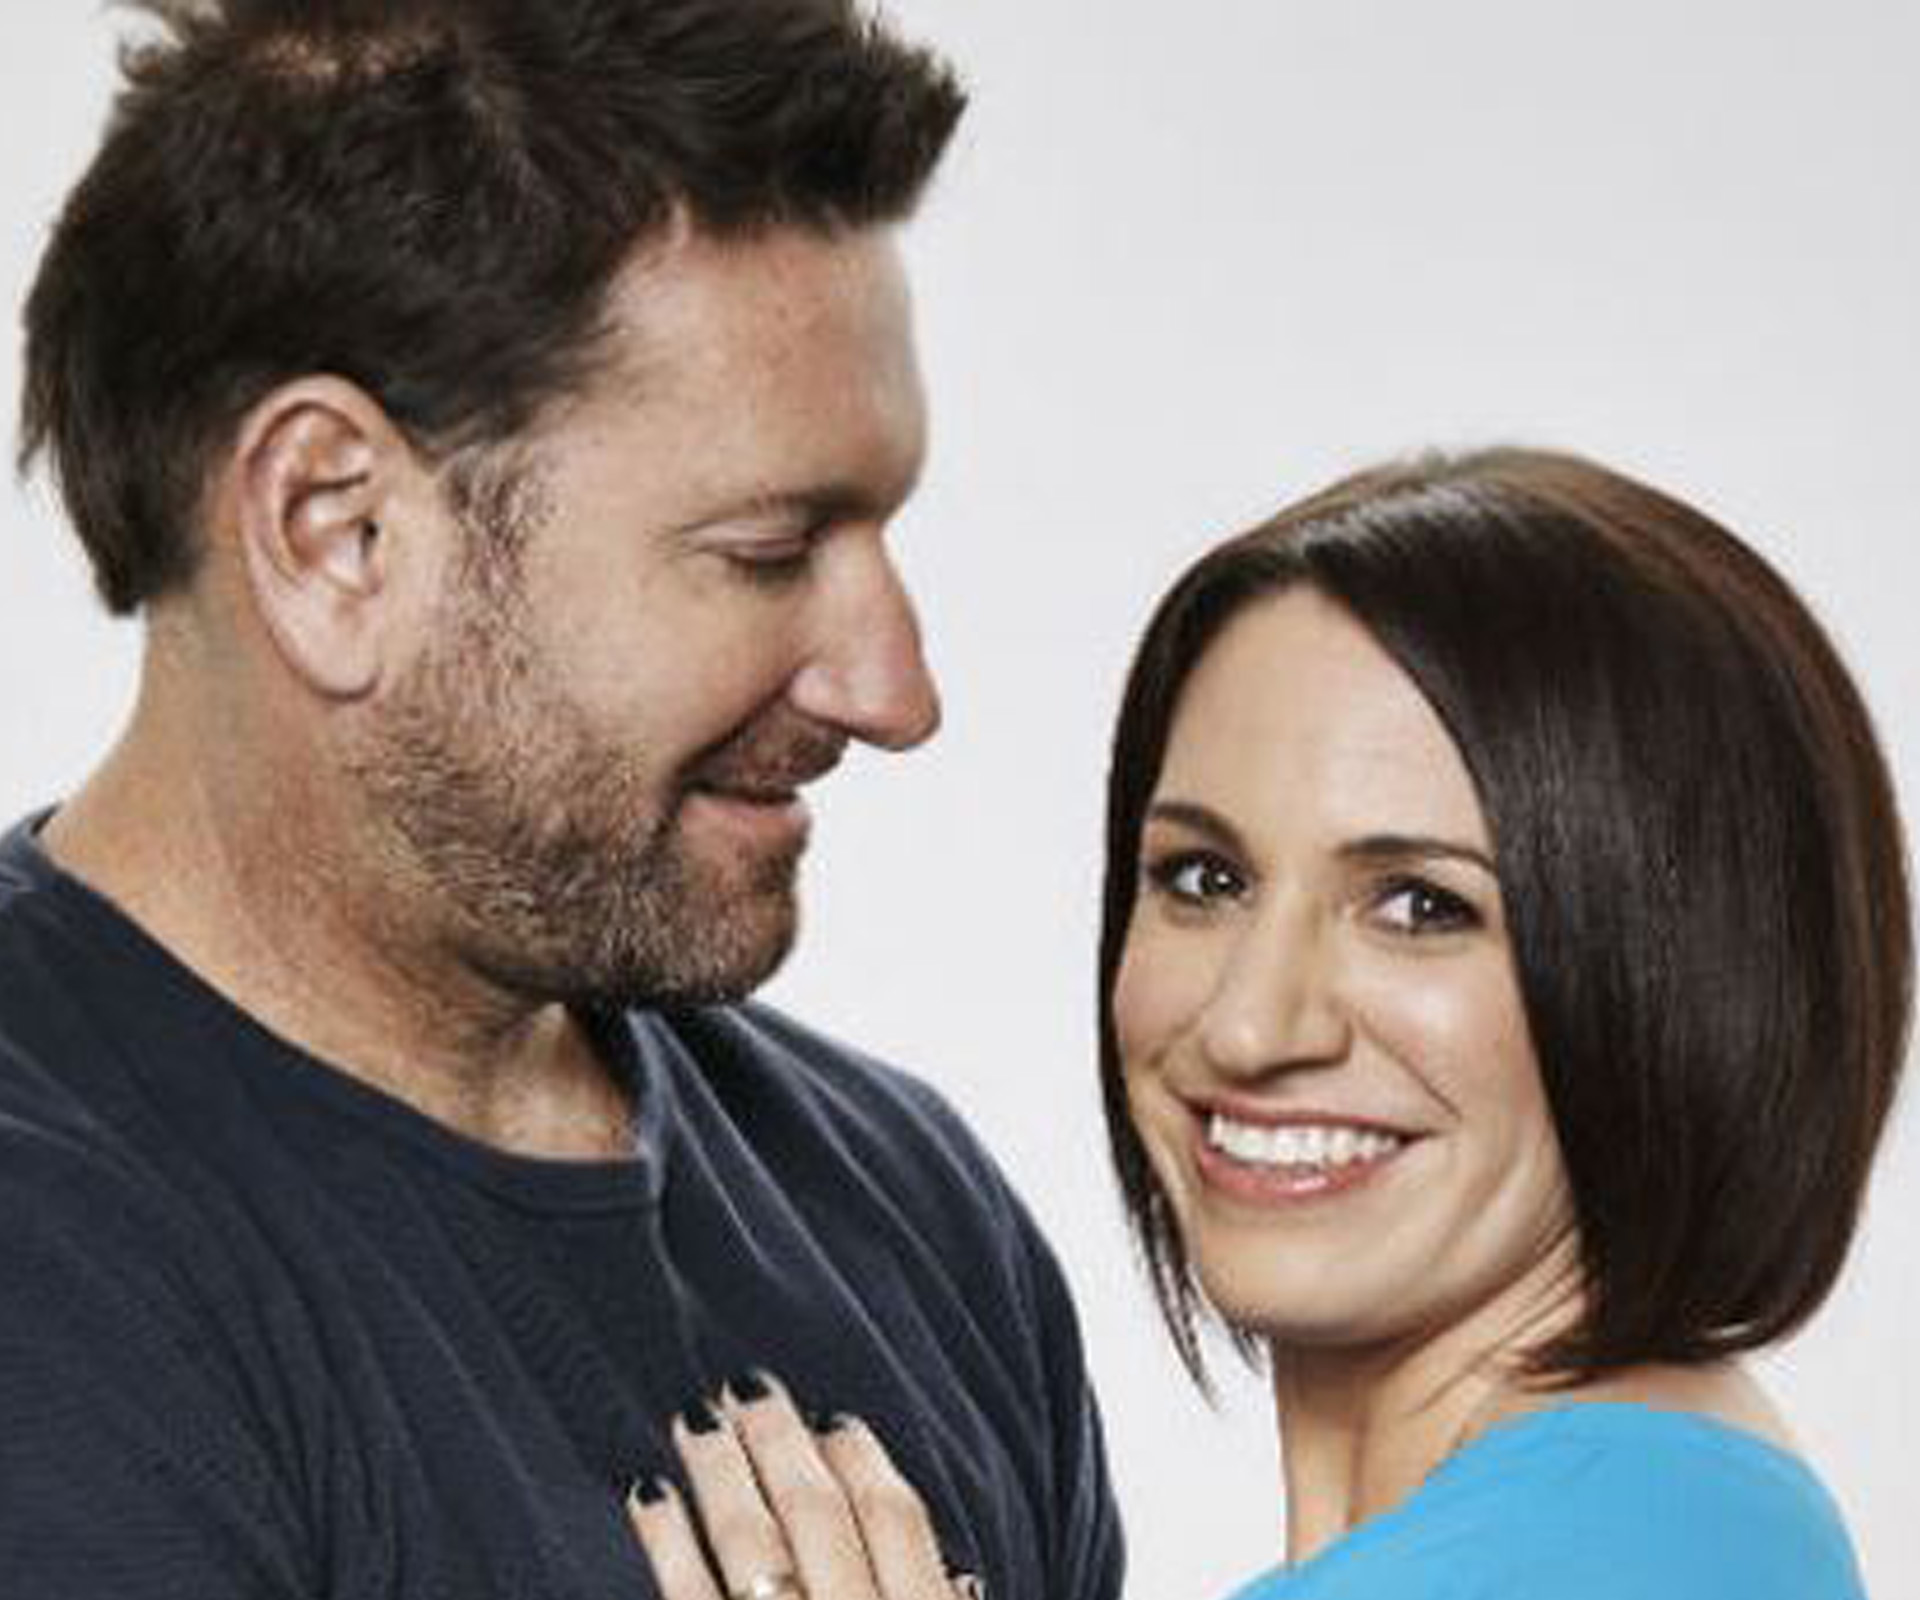 Married At First Sight: Clare and Lachlan split